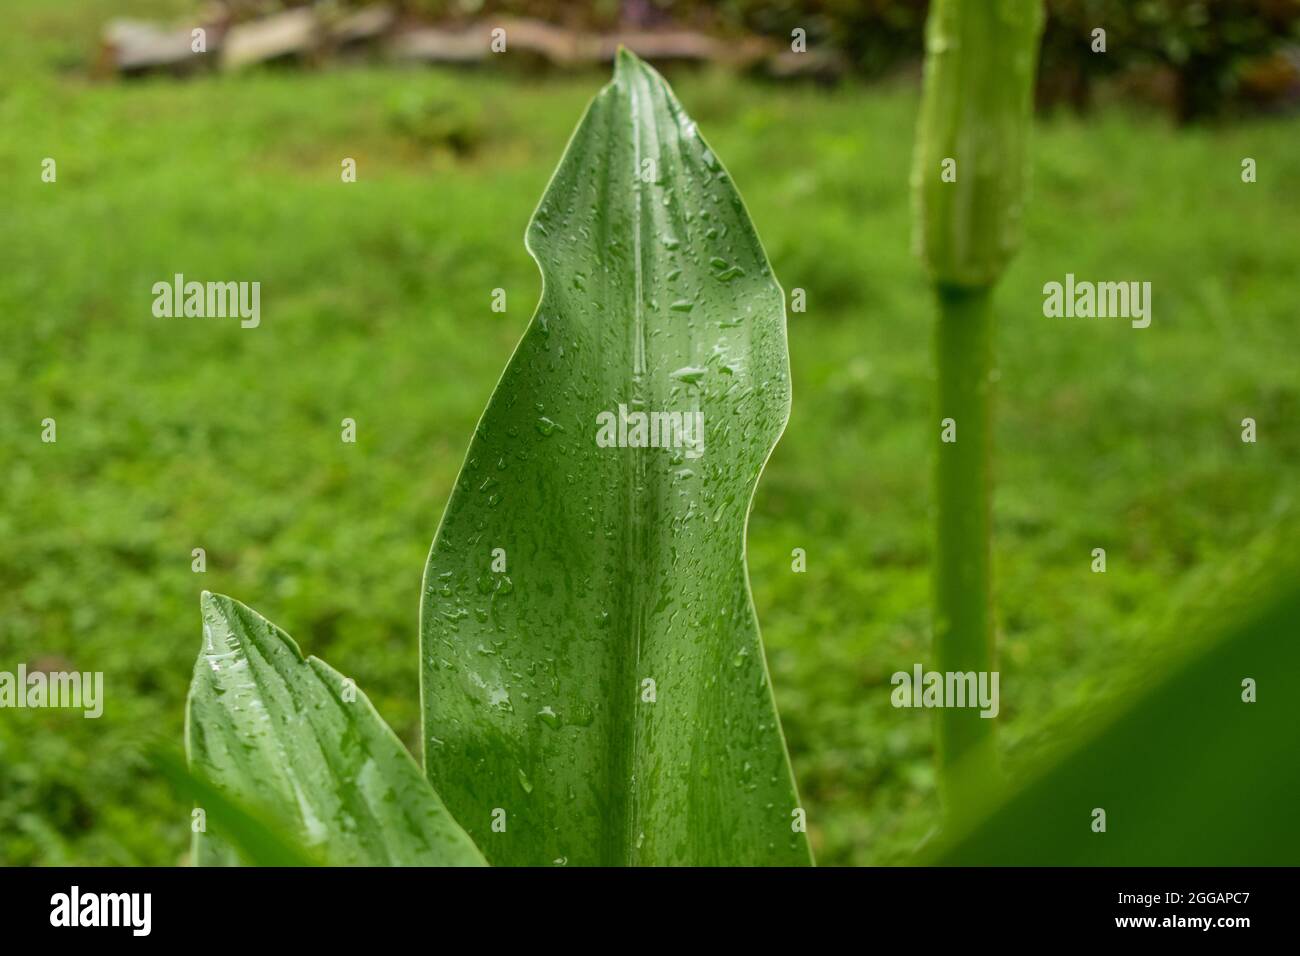 Big Green Wet Tree Leaf in Garden/Park Greenery Stock Photograph Stock Photo